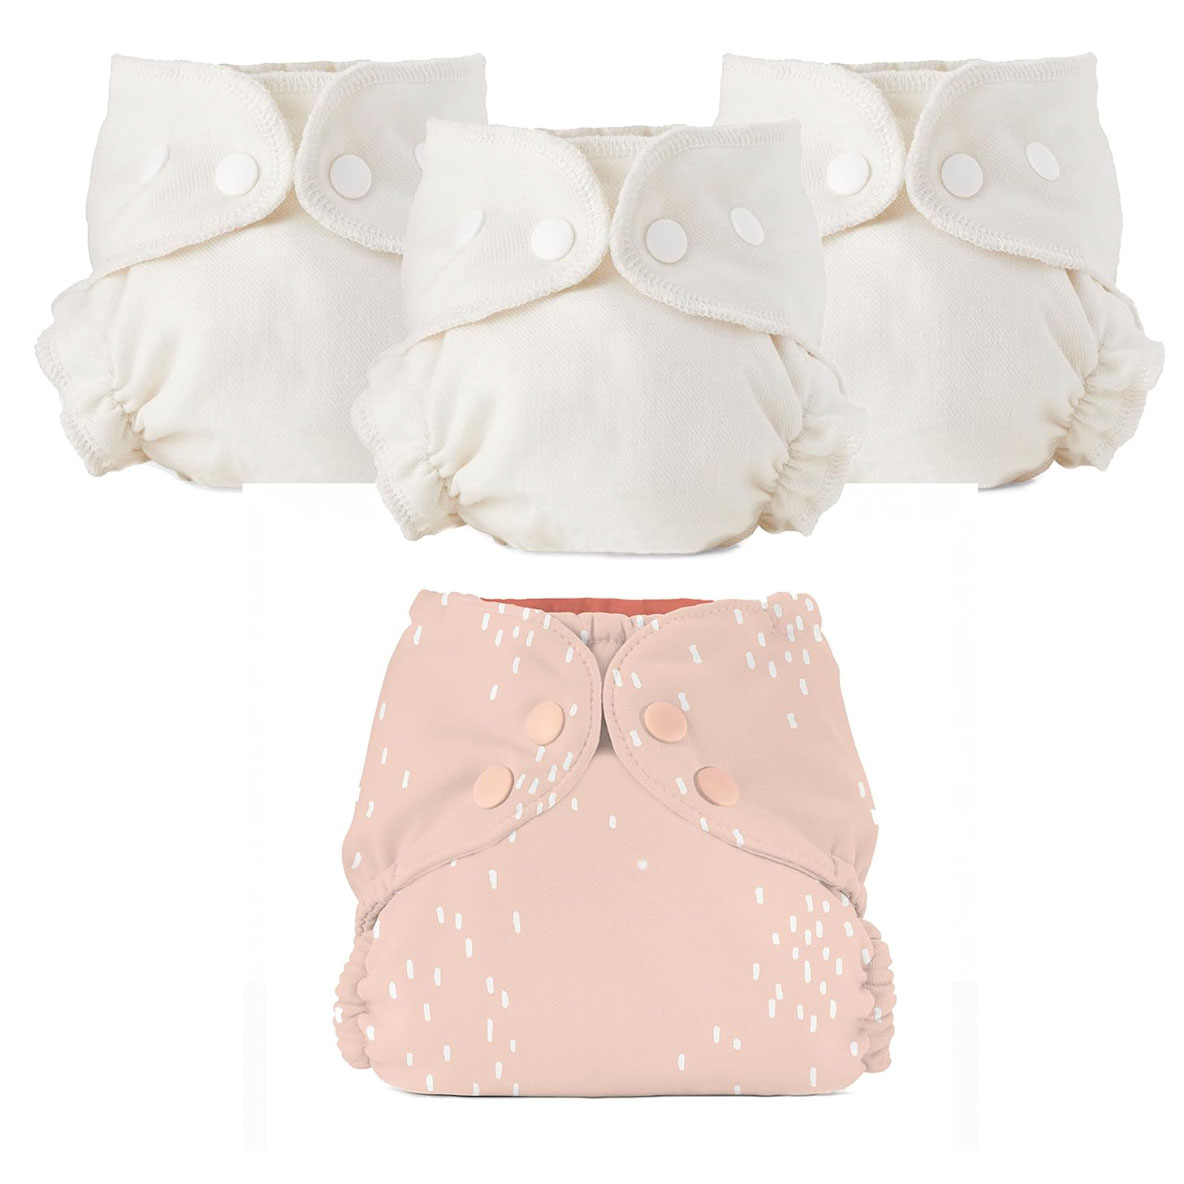 Three white cloth diapers and one pink diaper